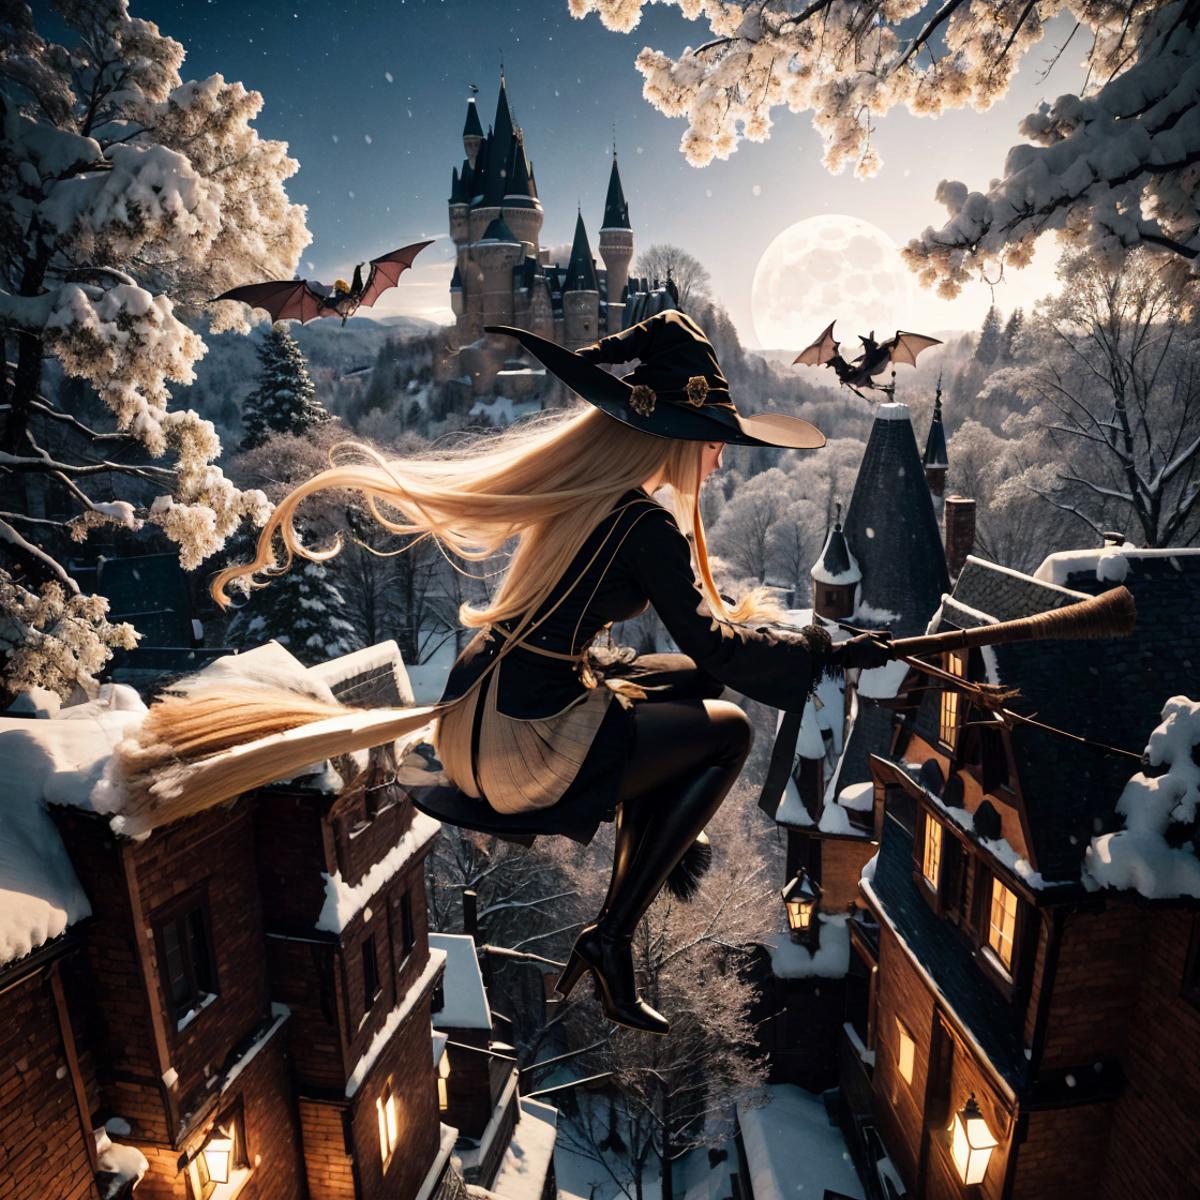 Witch riding on broomstick [Canny/Depth]  image by yomama123556778